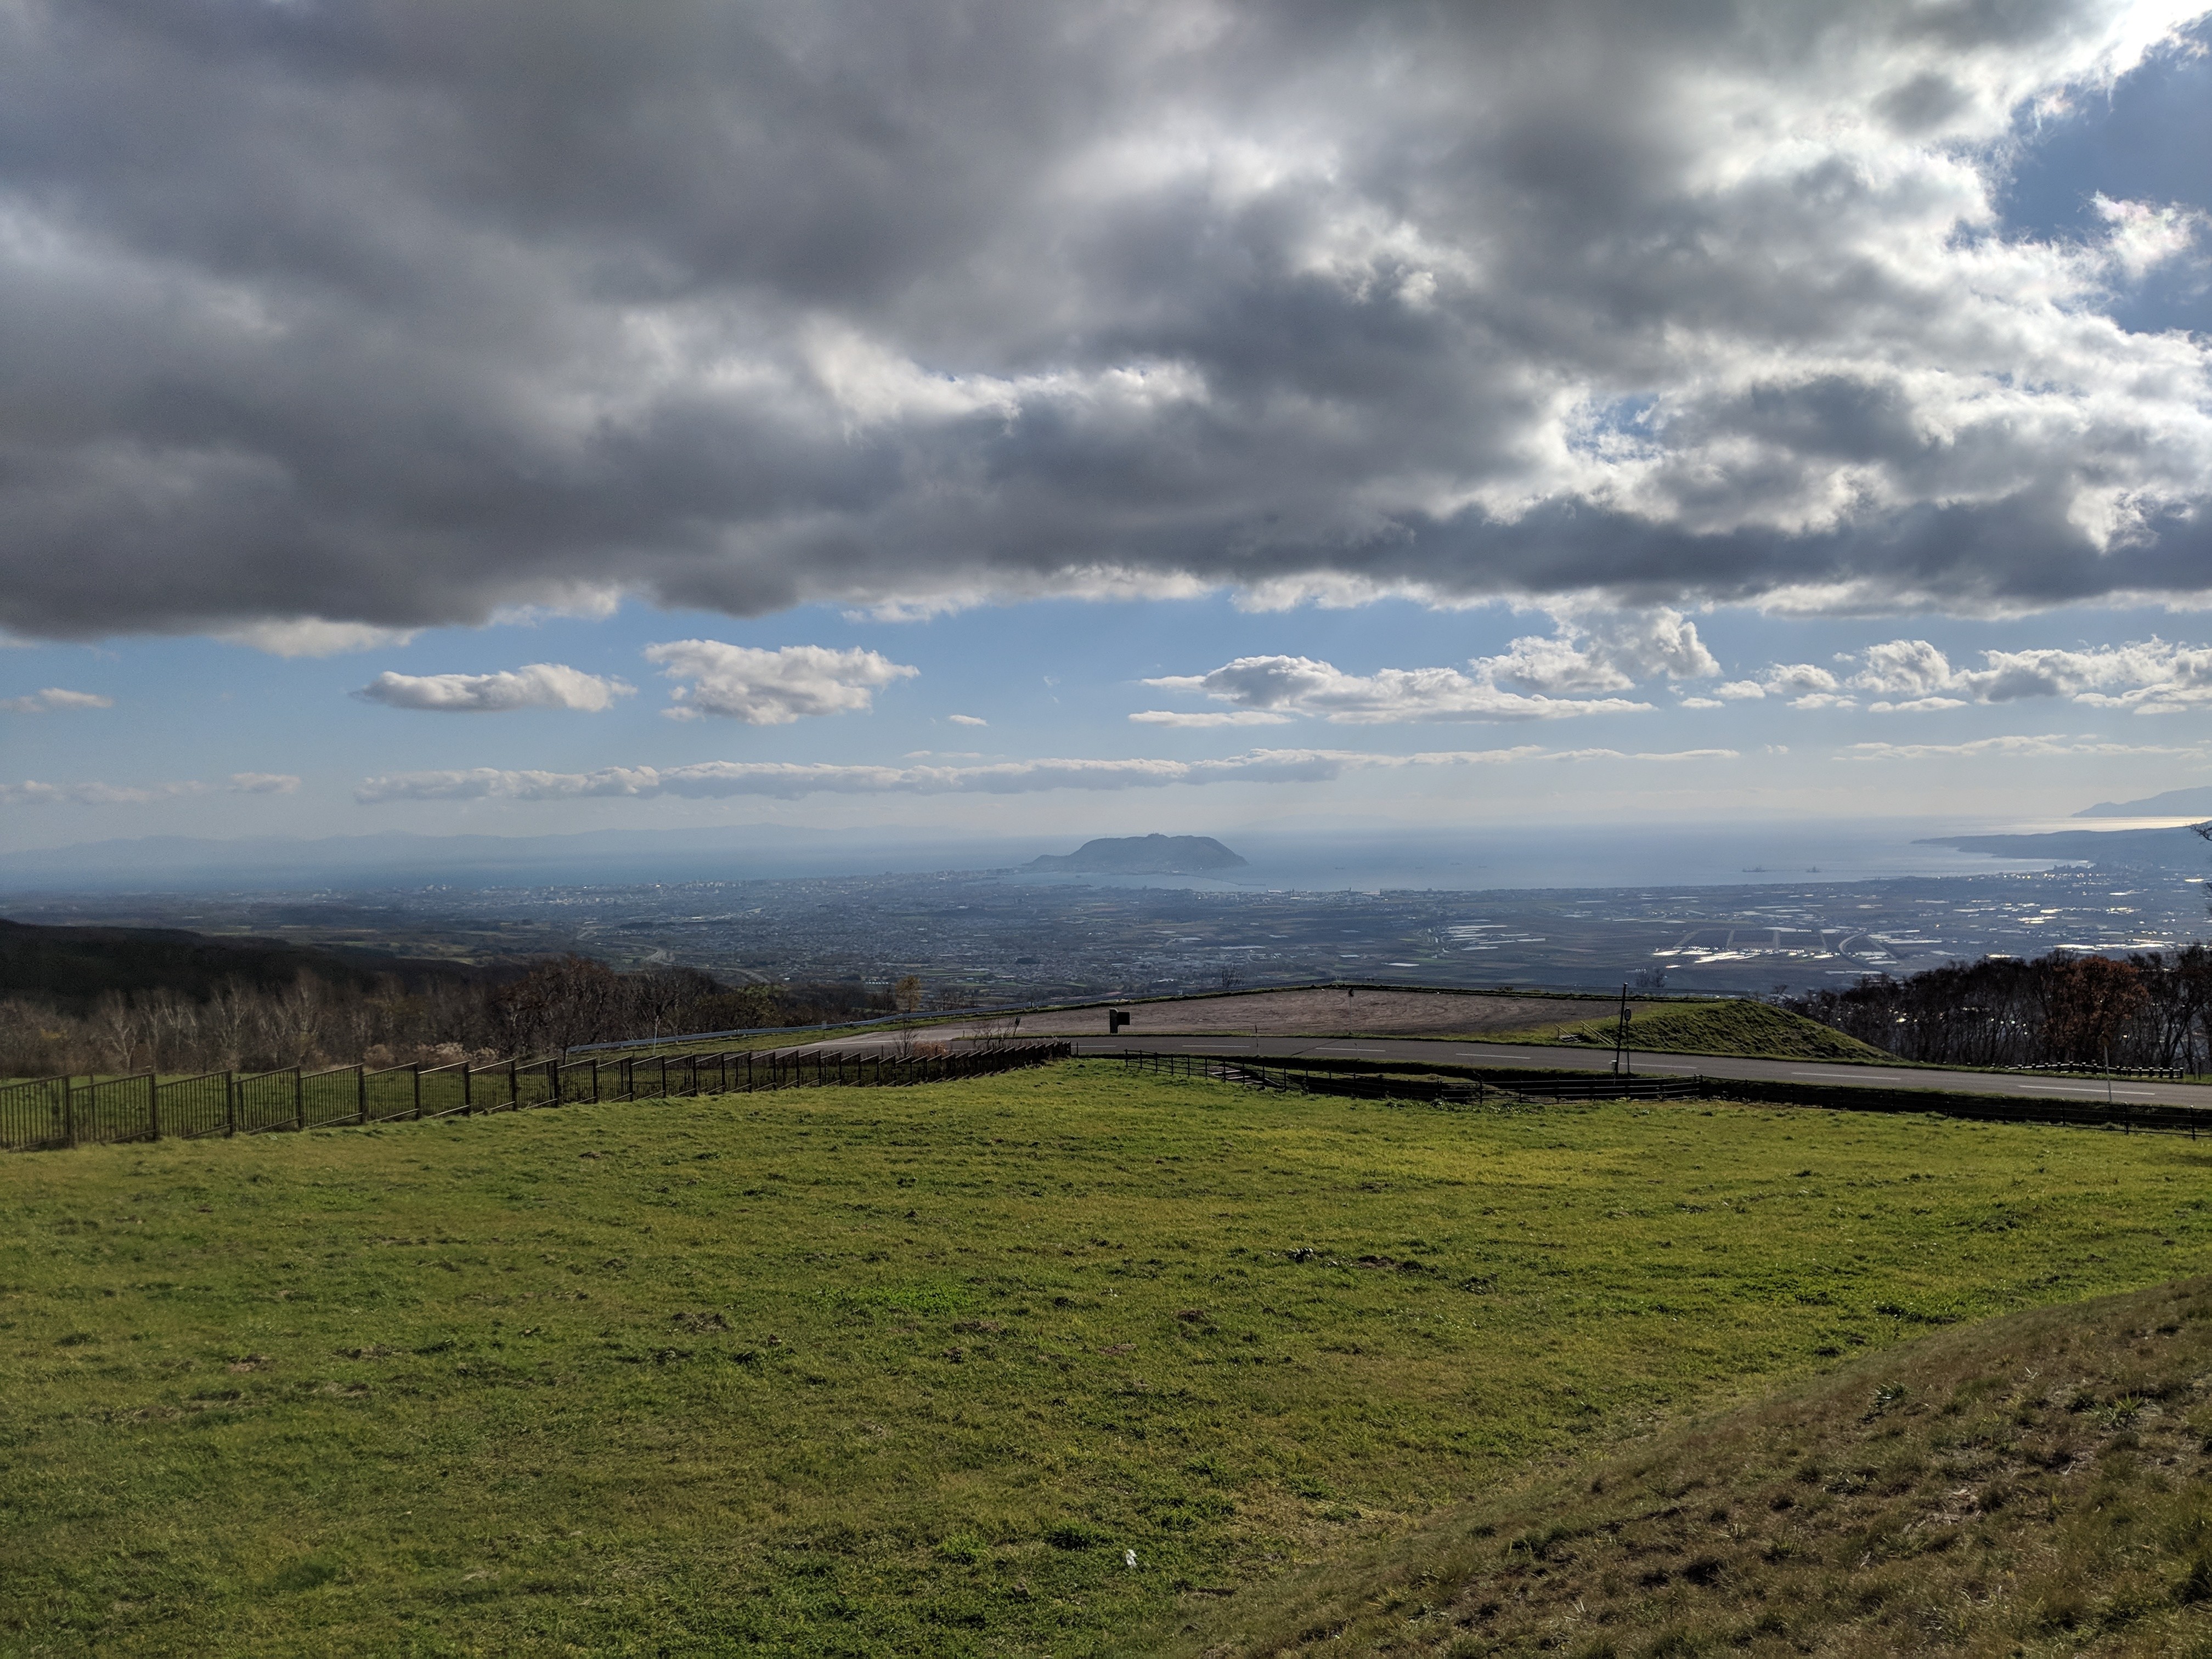 The view from the Shirotai Pasture Observatory, with Mt. Hakodate in the distance